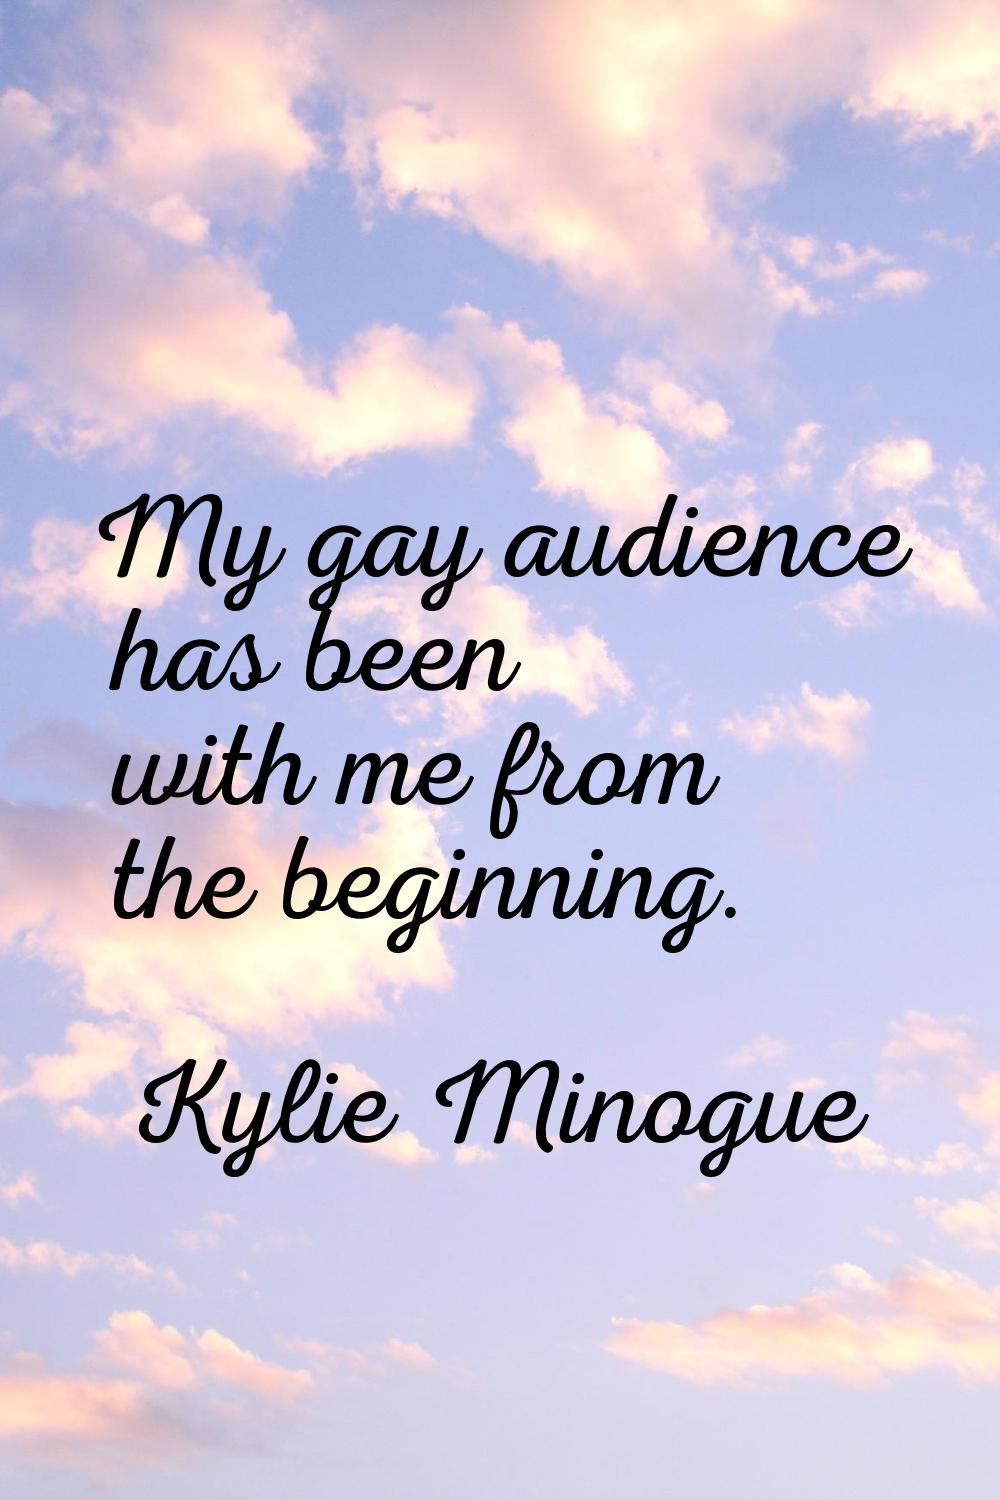 My gay audience has been with me from the beginning.